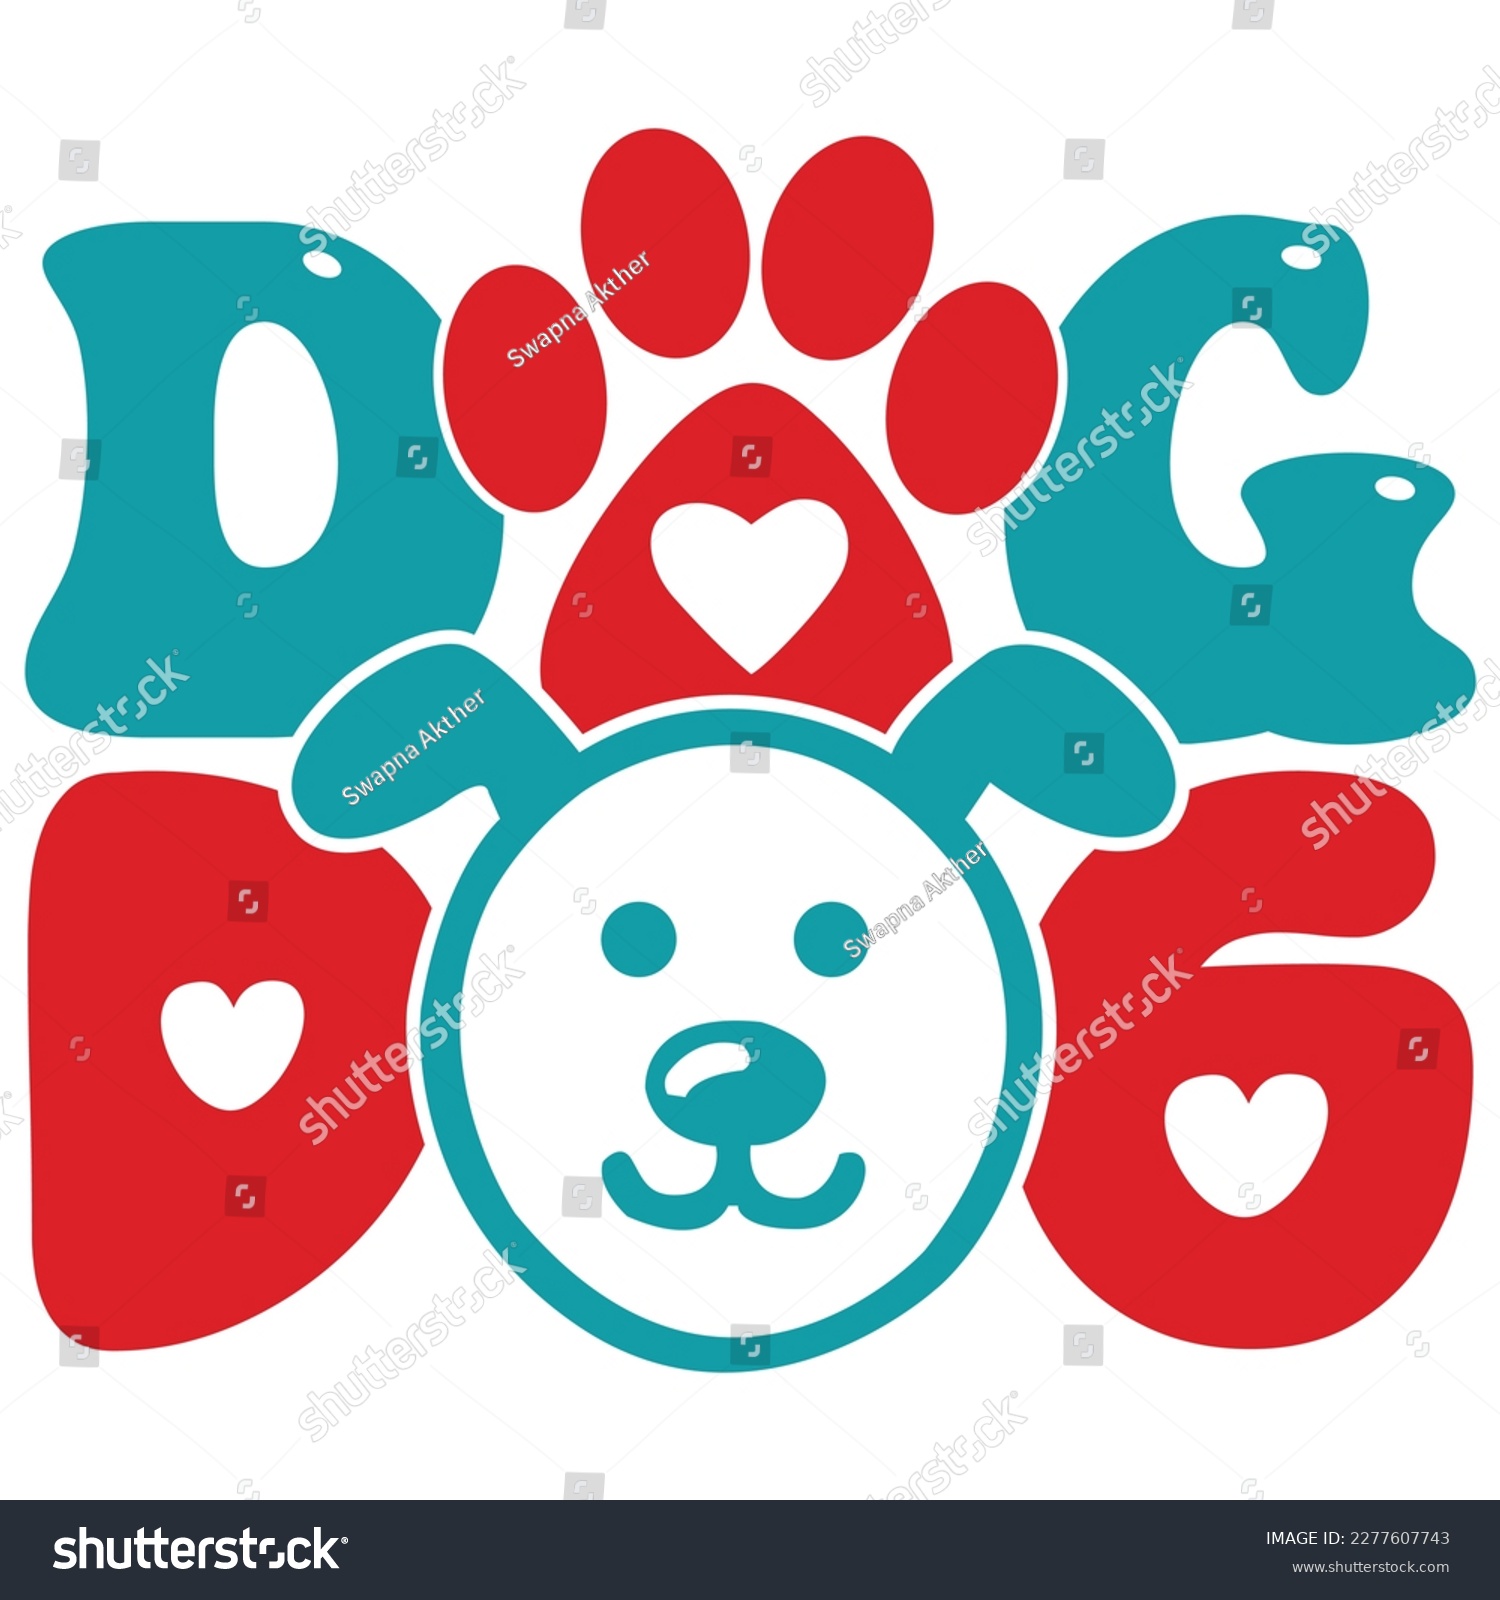 SVG of Dog - Boho Retro Style Dog T-shirt And SVG Design. Dog SVG Quotes T shirt Design, Vector EPS Editable Files, Can You Download This File. svg